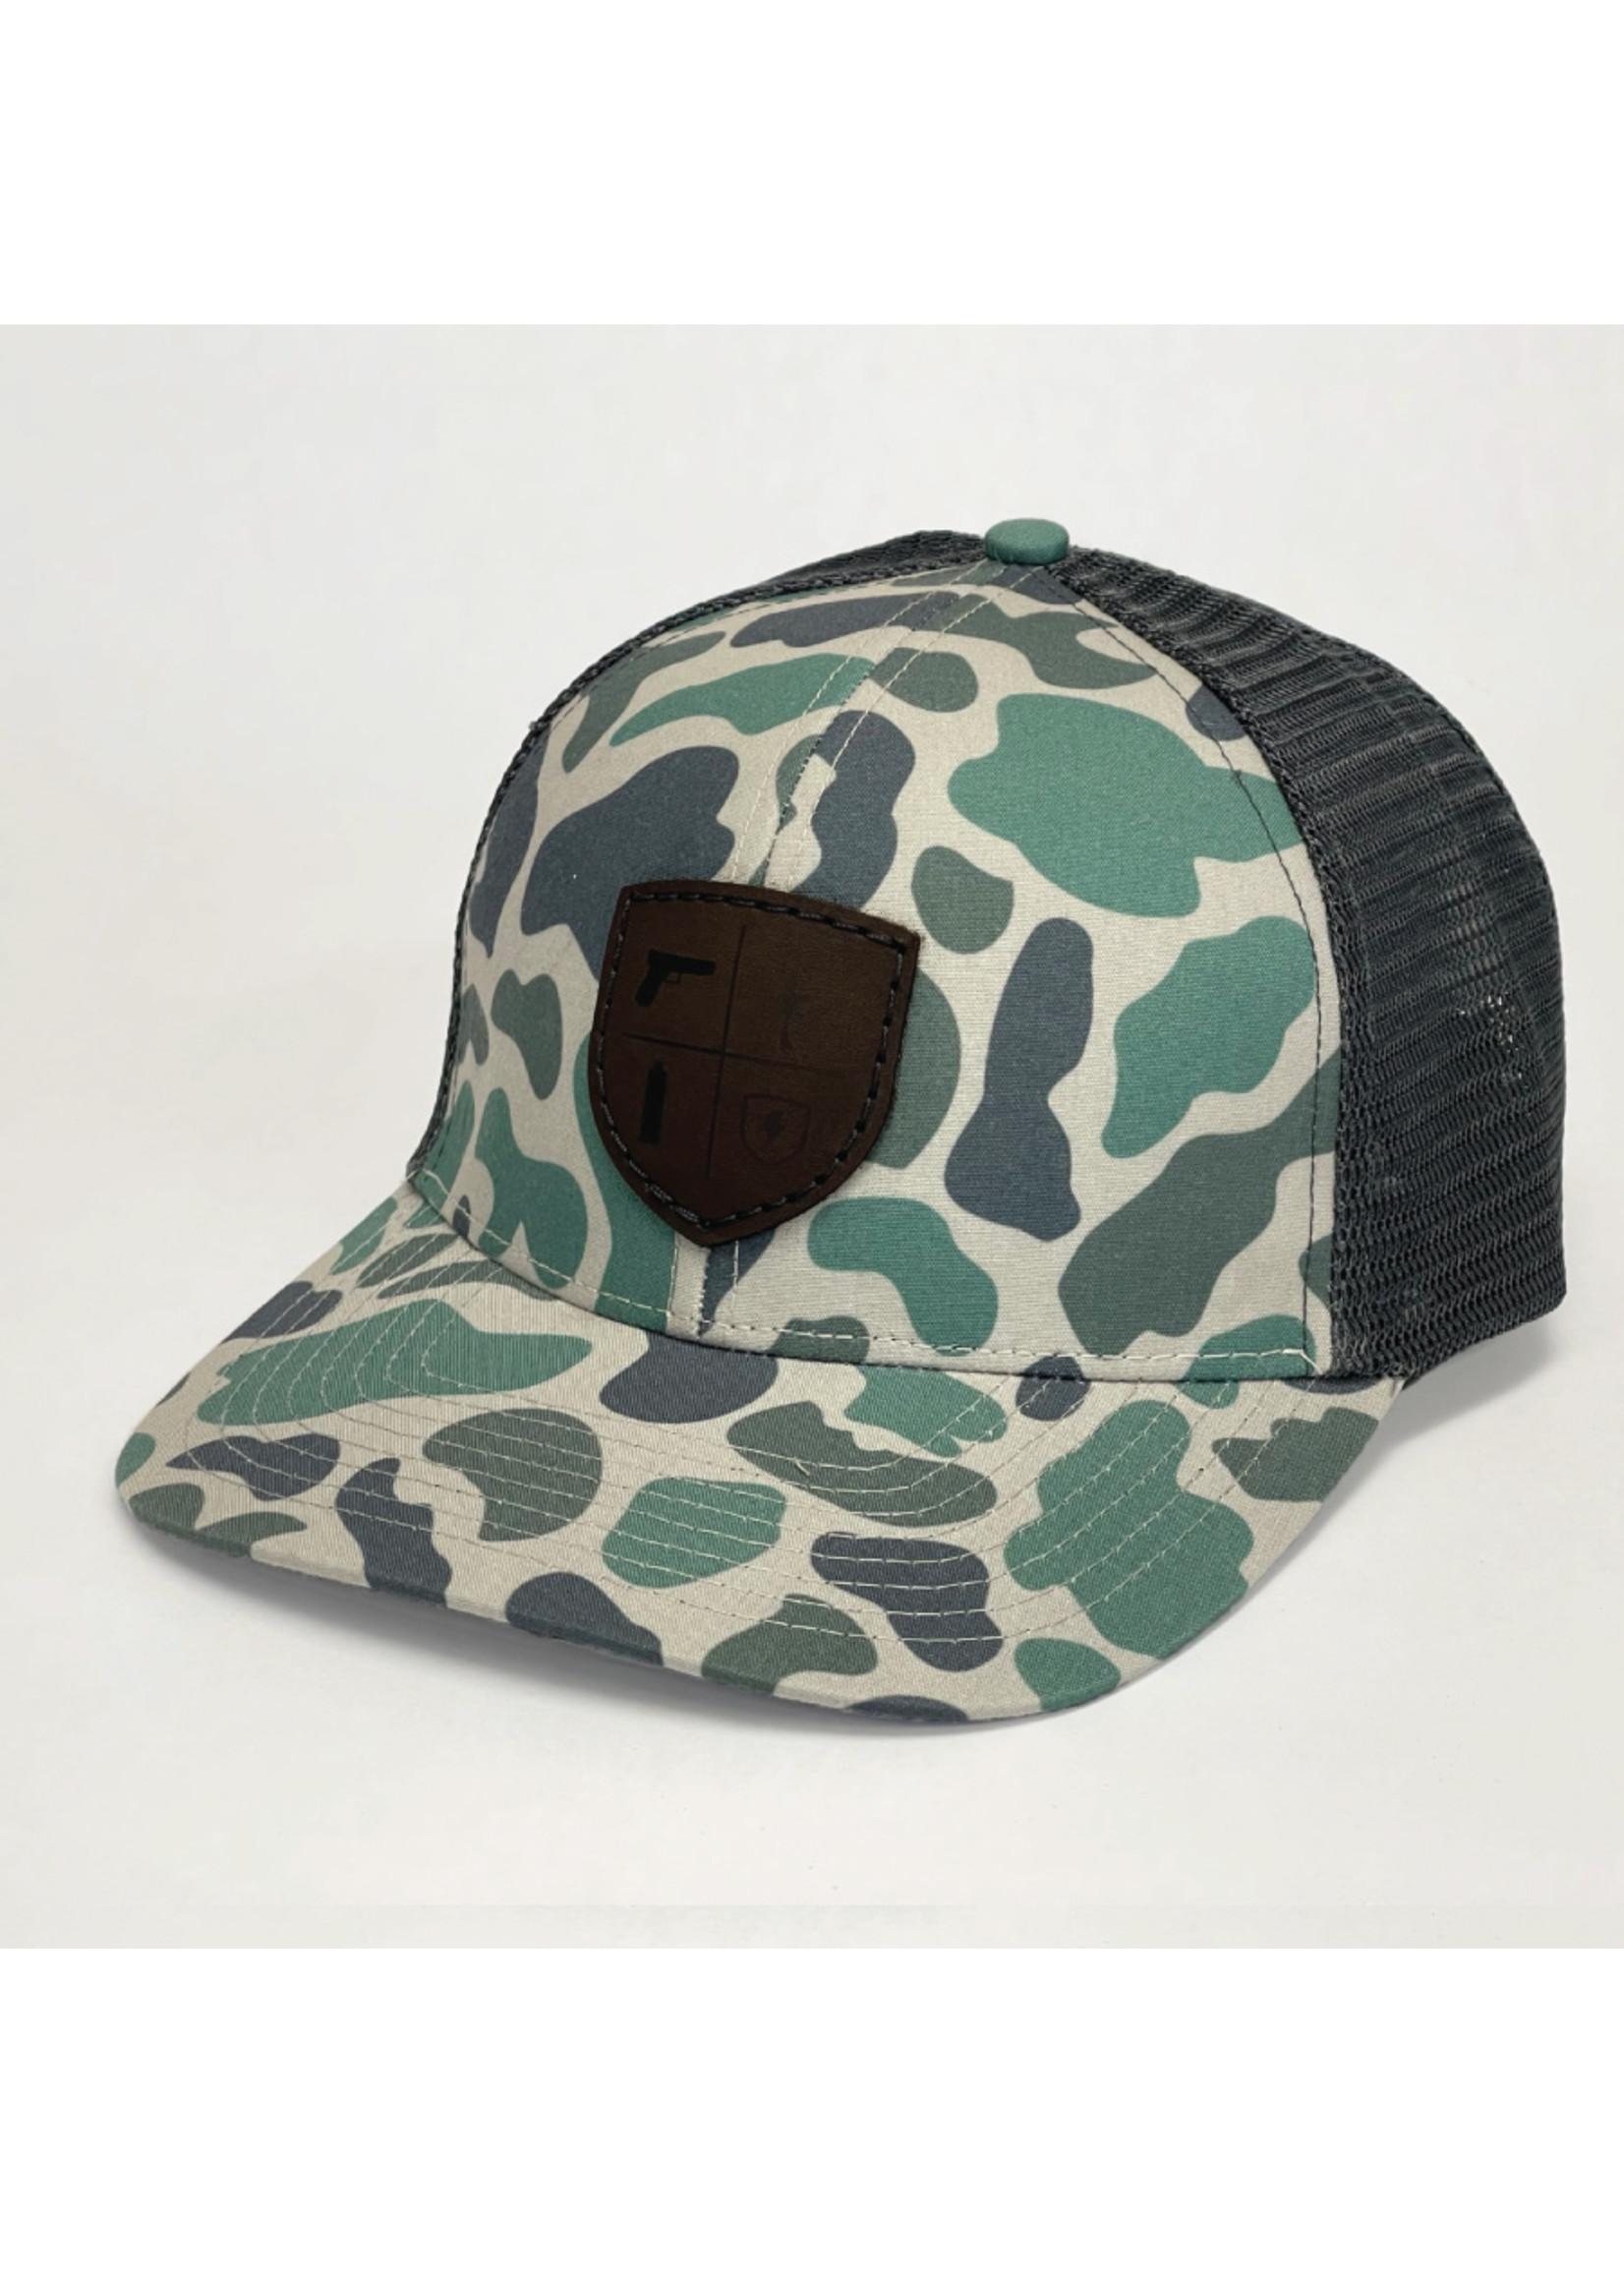 Lost Hat Co. Slate Old's Cool Camo Patch Hat